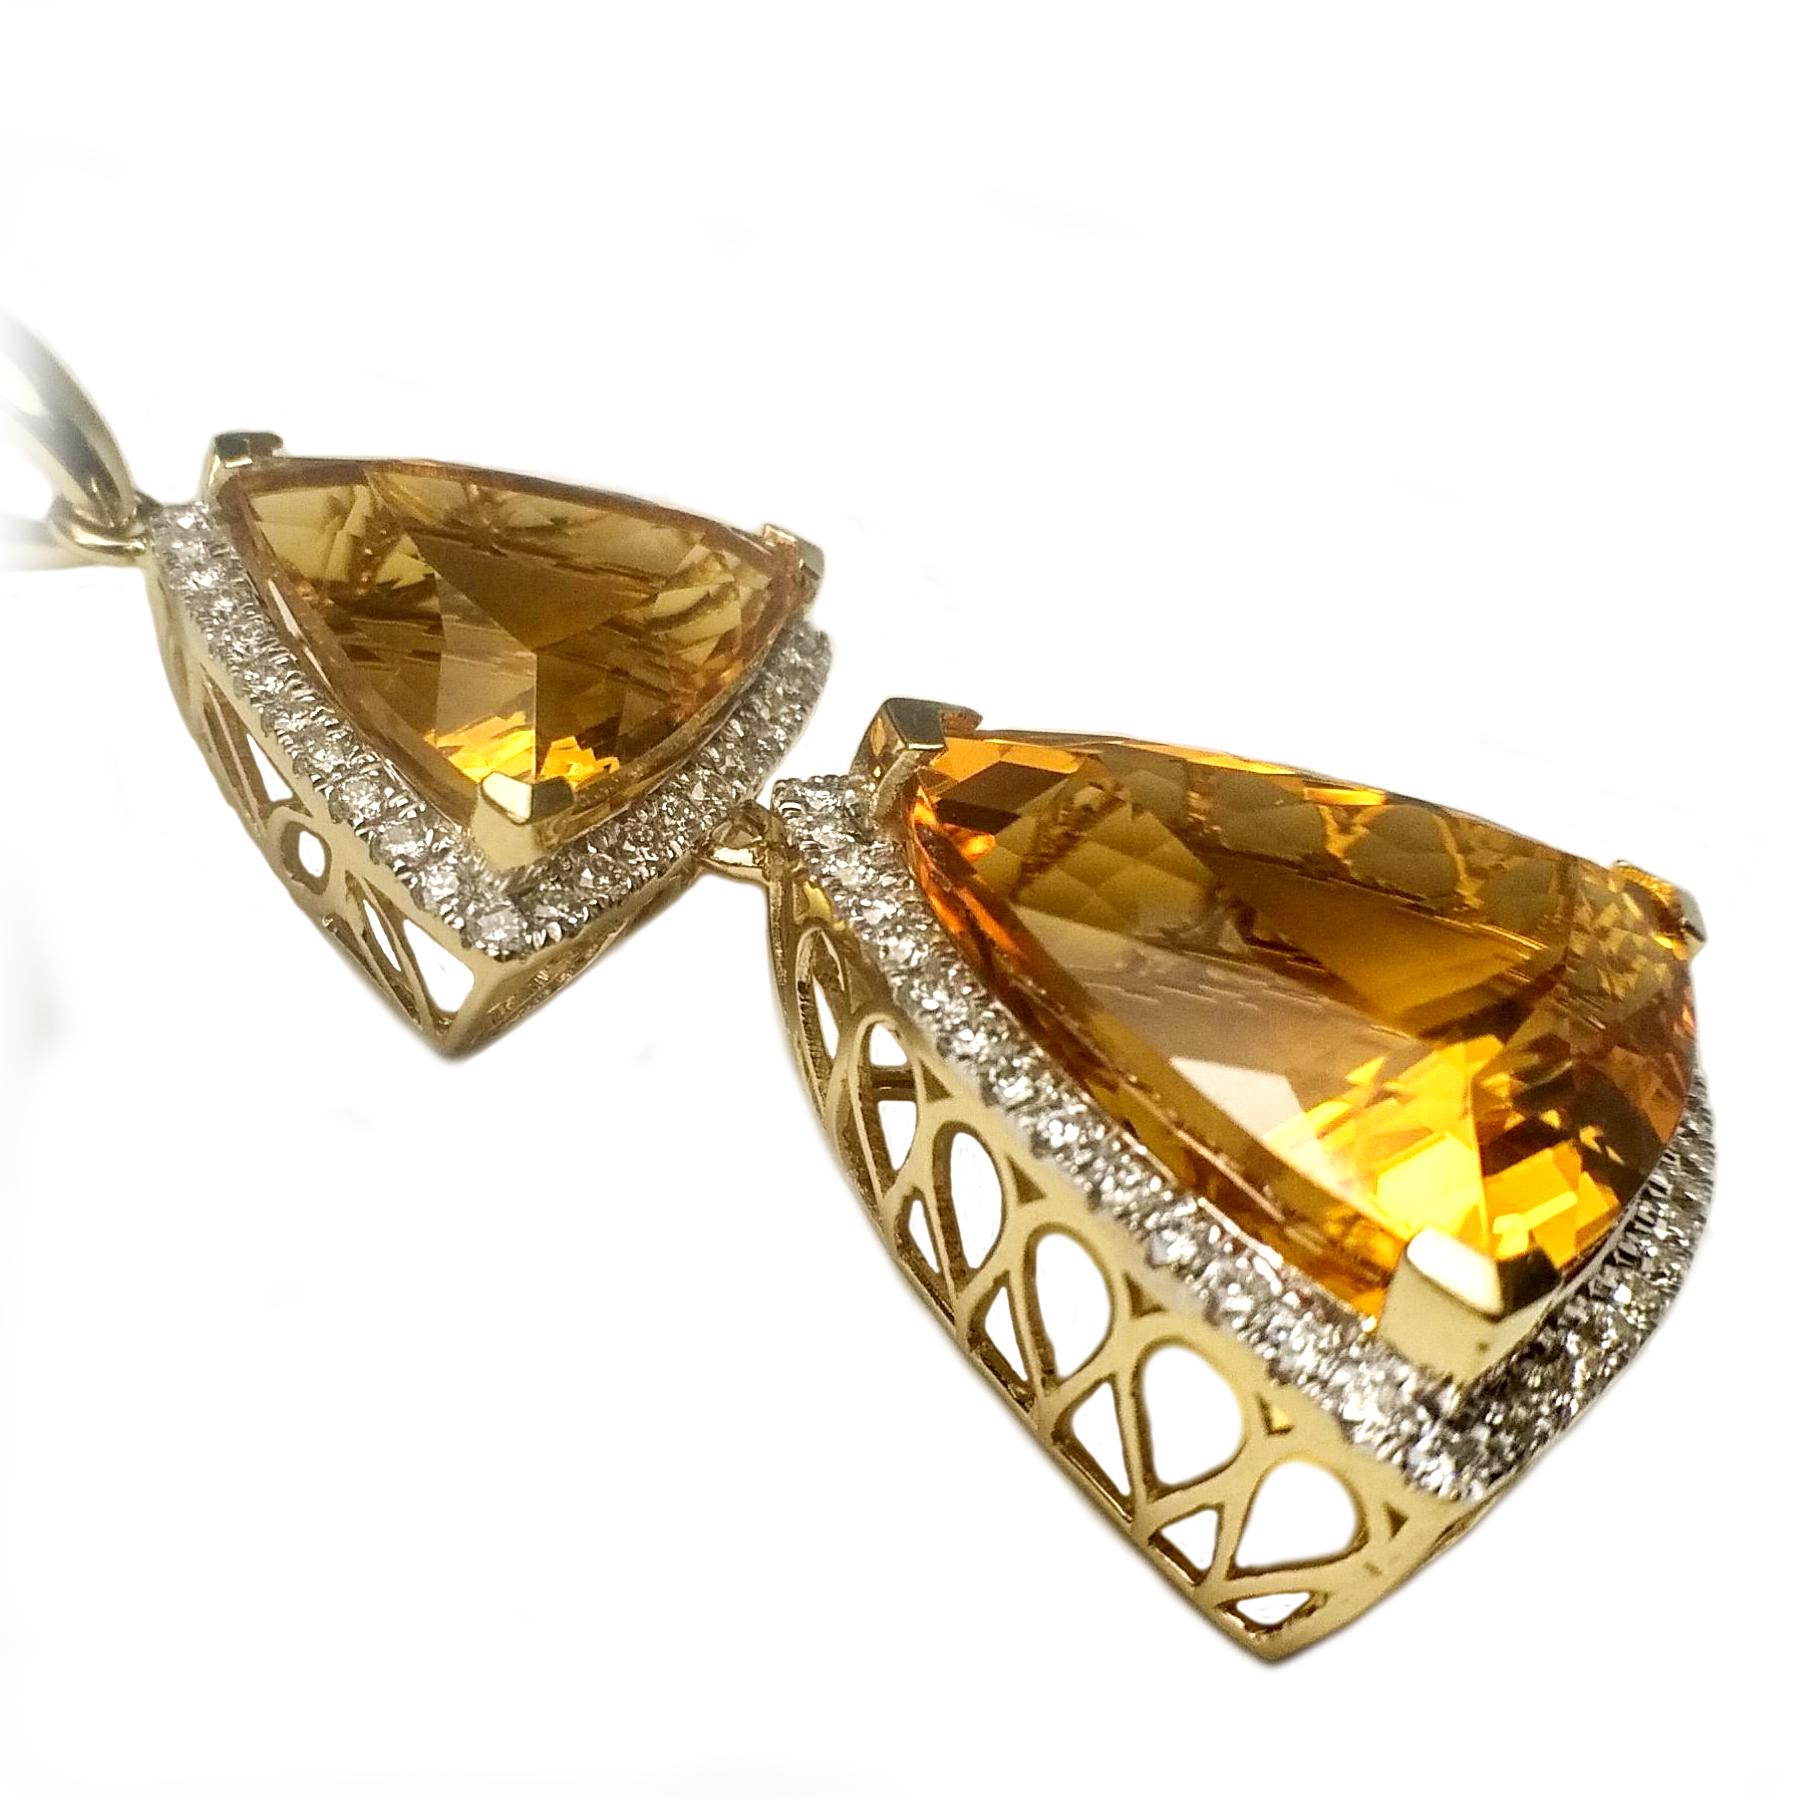 Dangling citrine diamond pendant. Handcrafted high luster, golden honey yellow 28.90 carat trillion faceted two citrines, encased in basket mounting with total six split prongs. Accented with round brilliant cut diamonds. Contemporary design set in